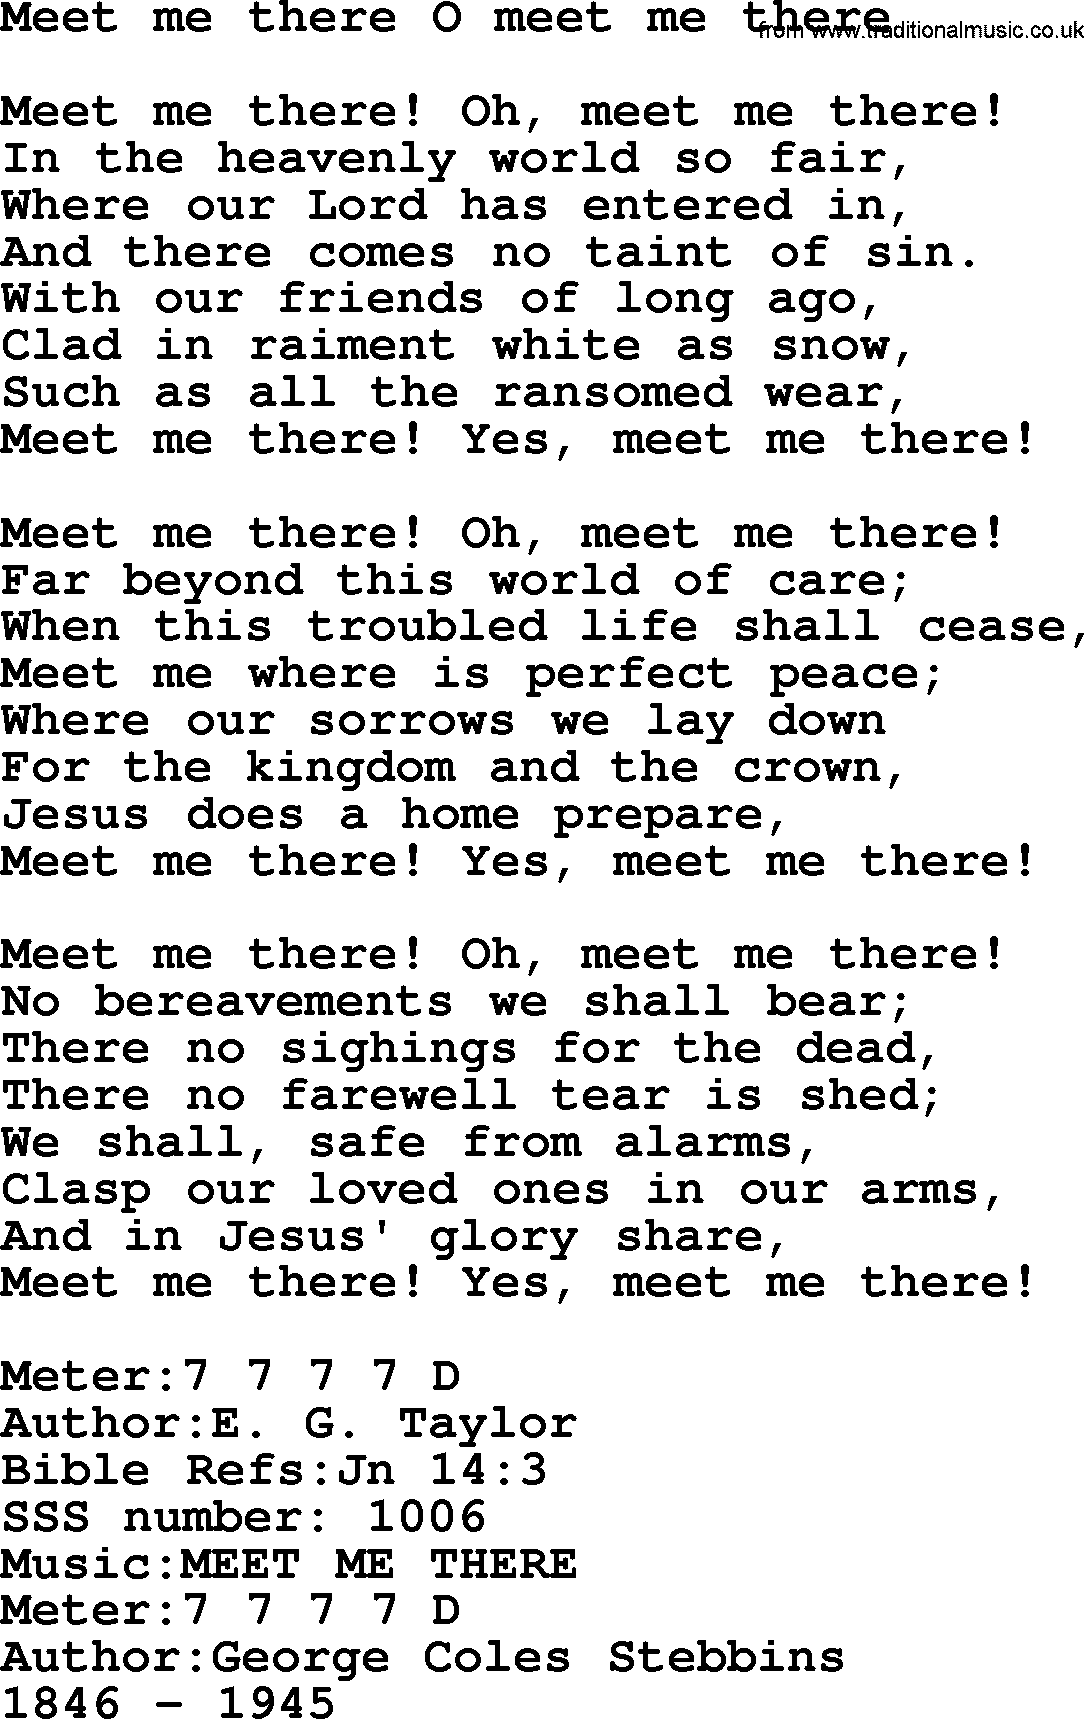 Sacred Songs and Solos complete, 1200 Hymns, title: Meet Me There O Meet Me There, lyrics and PDF